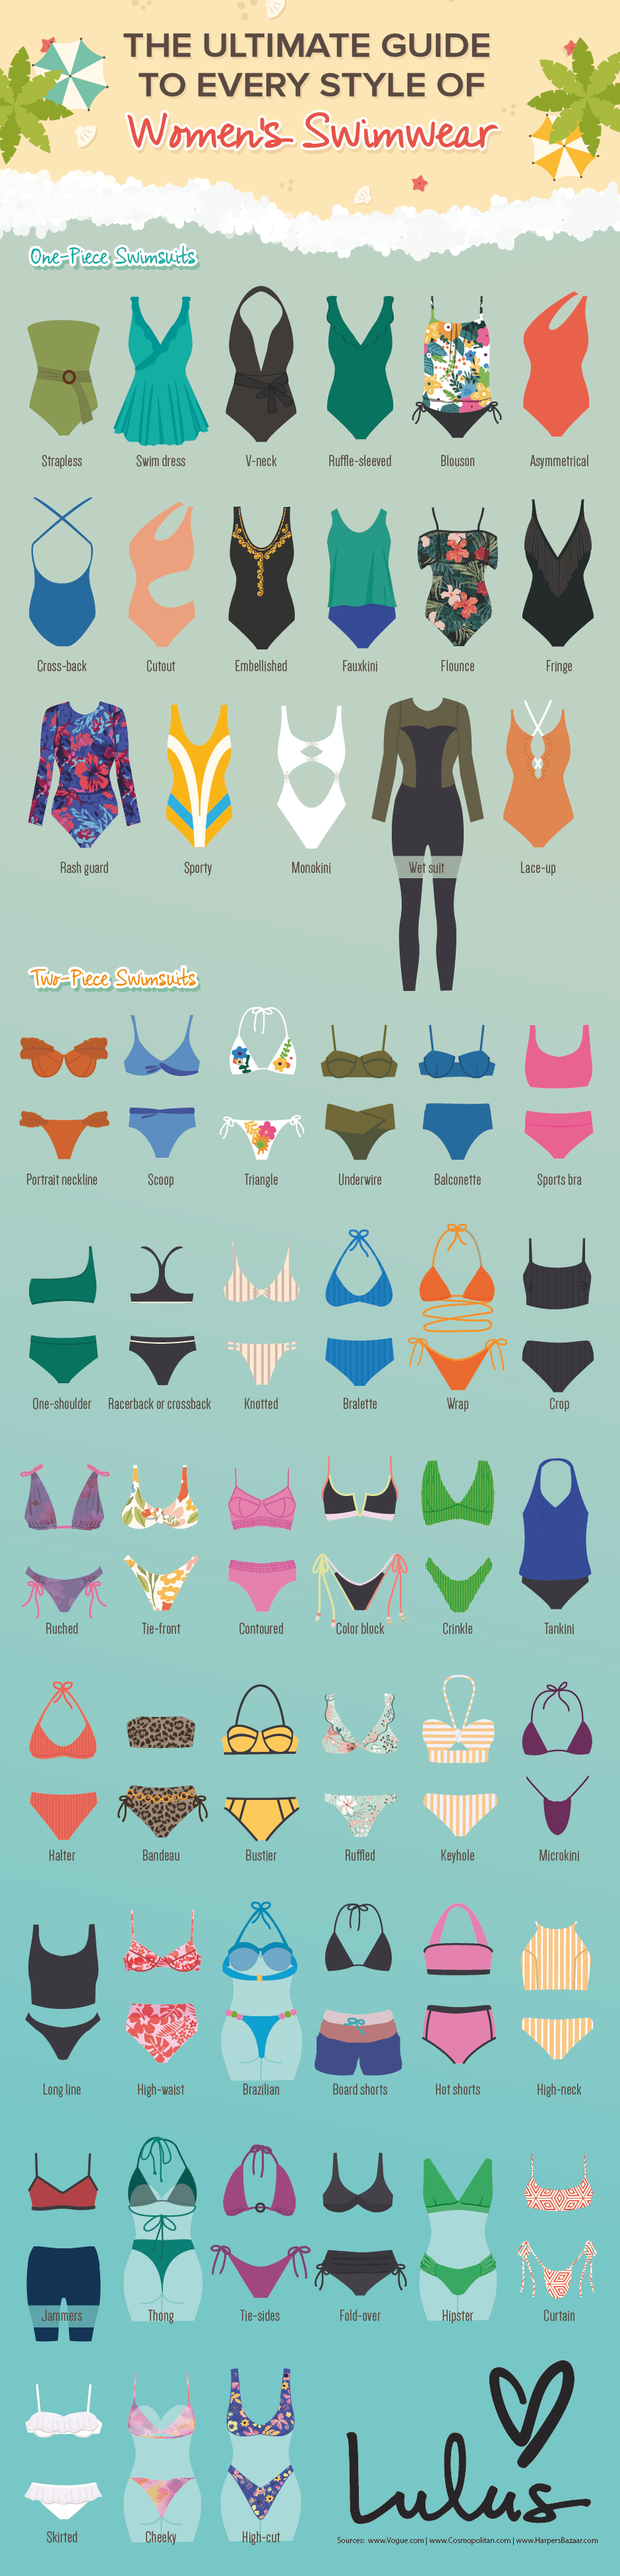 The Ultimate Guide to Every Style of Women's Swimwear - Lulus.com Fashion  Blog